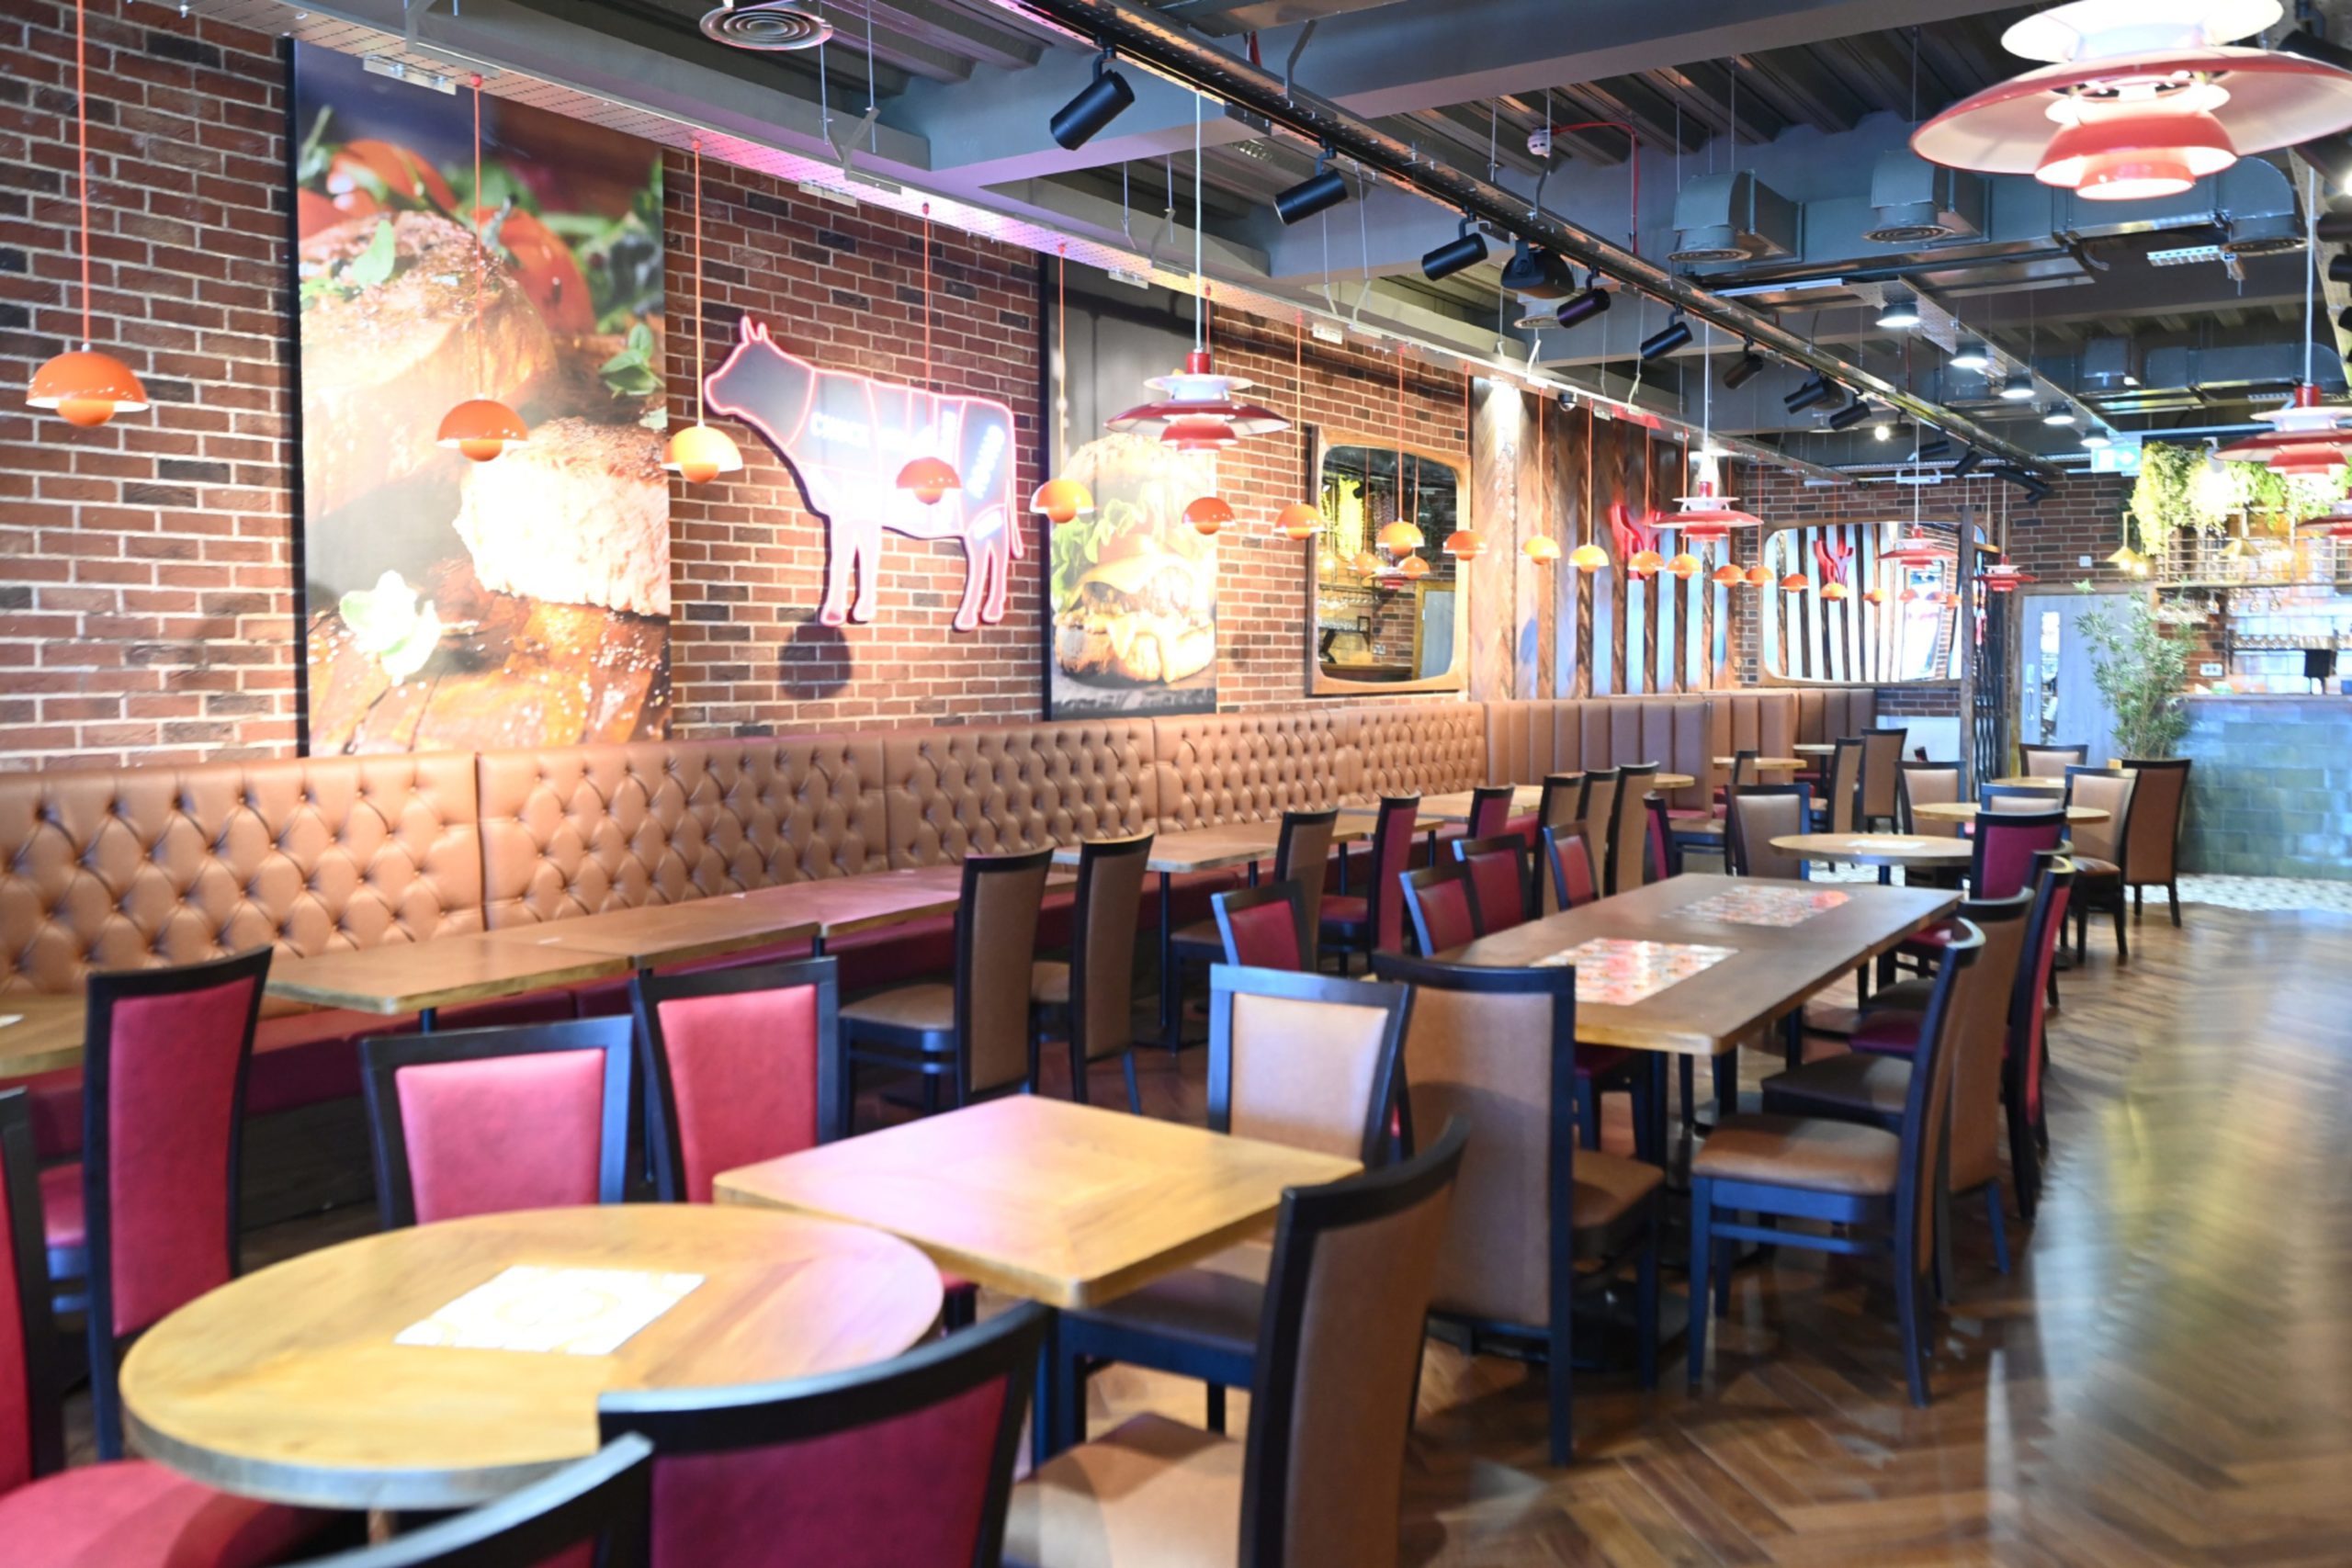 Interiors of Cartoos, a new grill house in Aberdeen located at the beachfront.